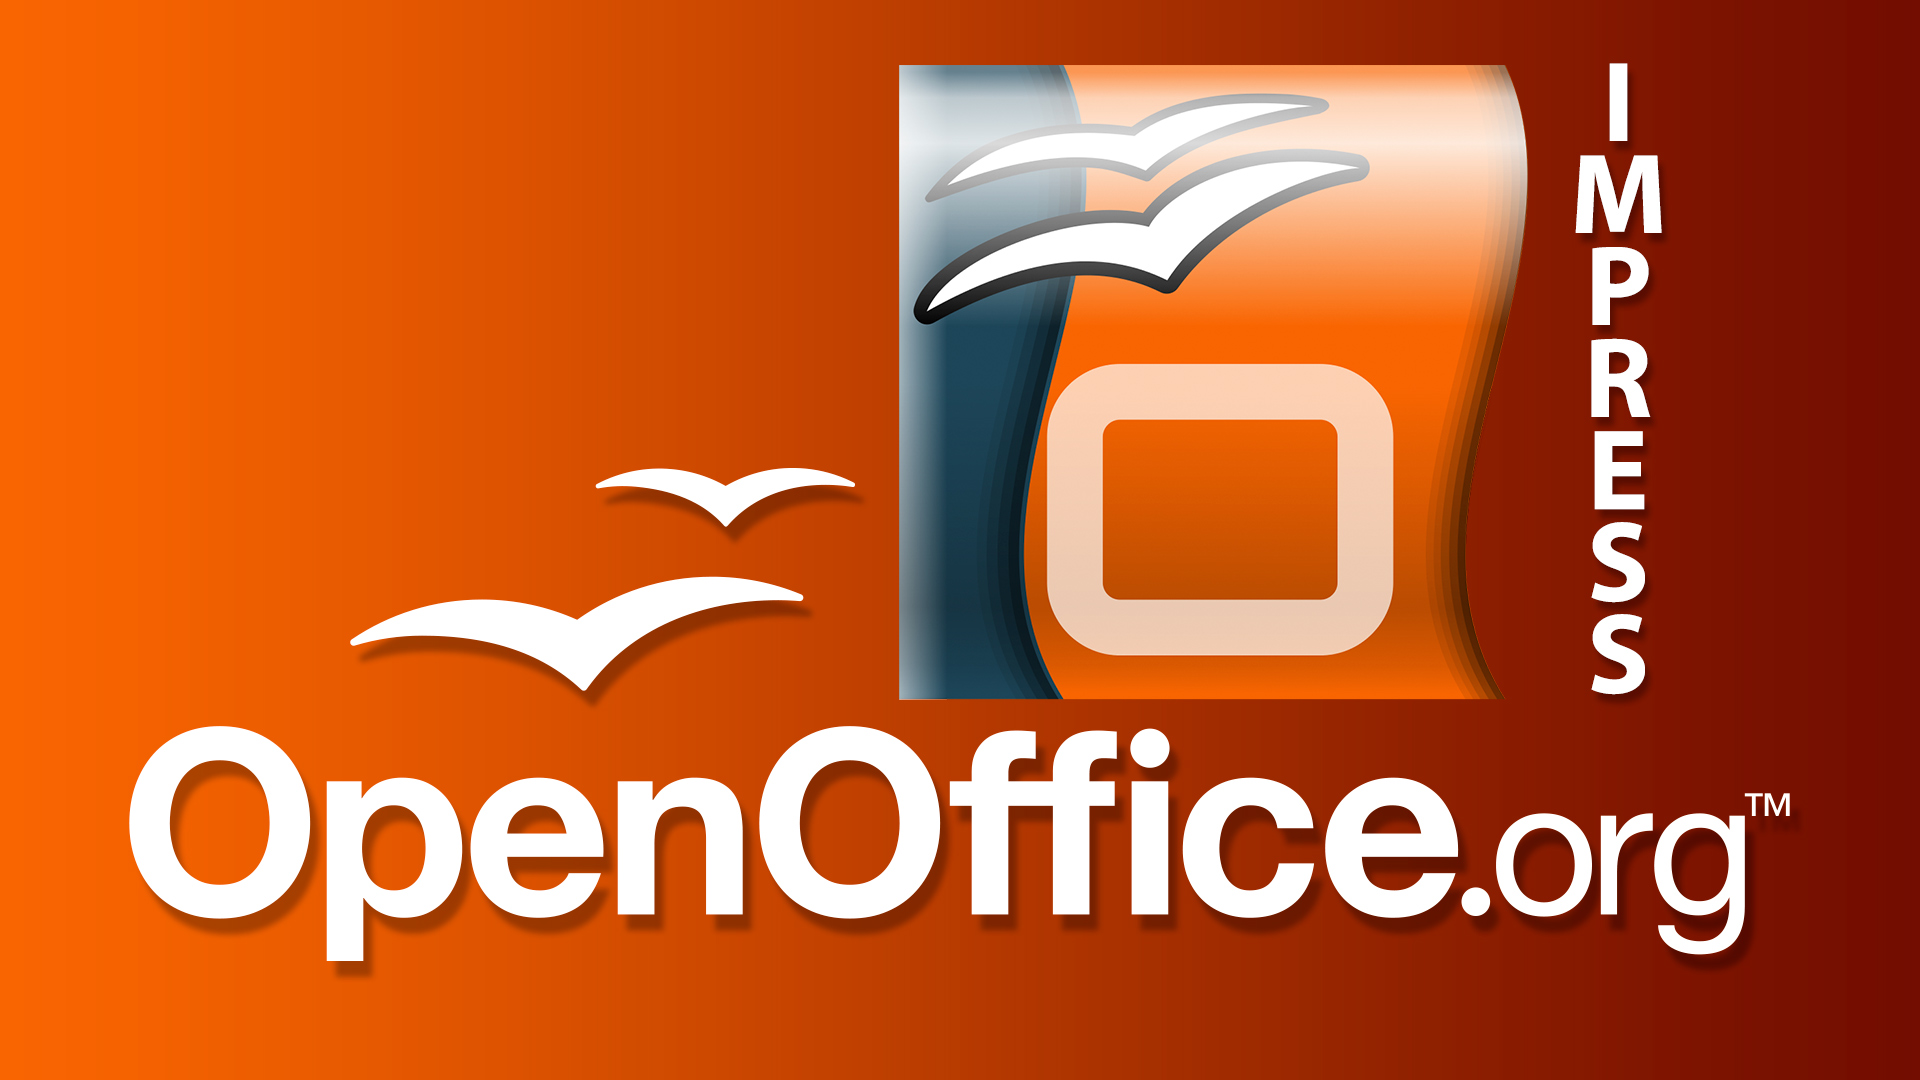 Open Office Impress - AP-Consulting